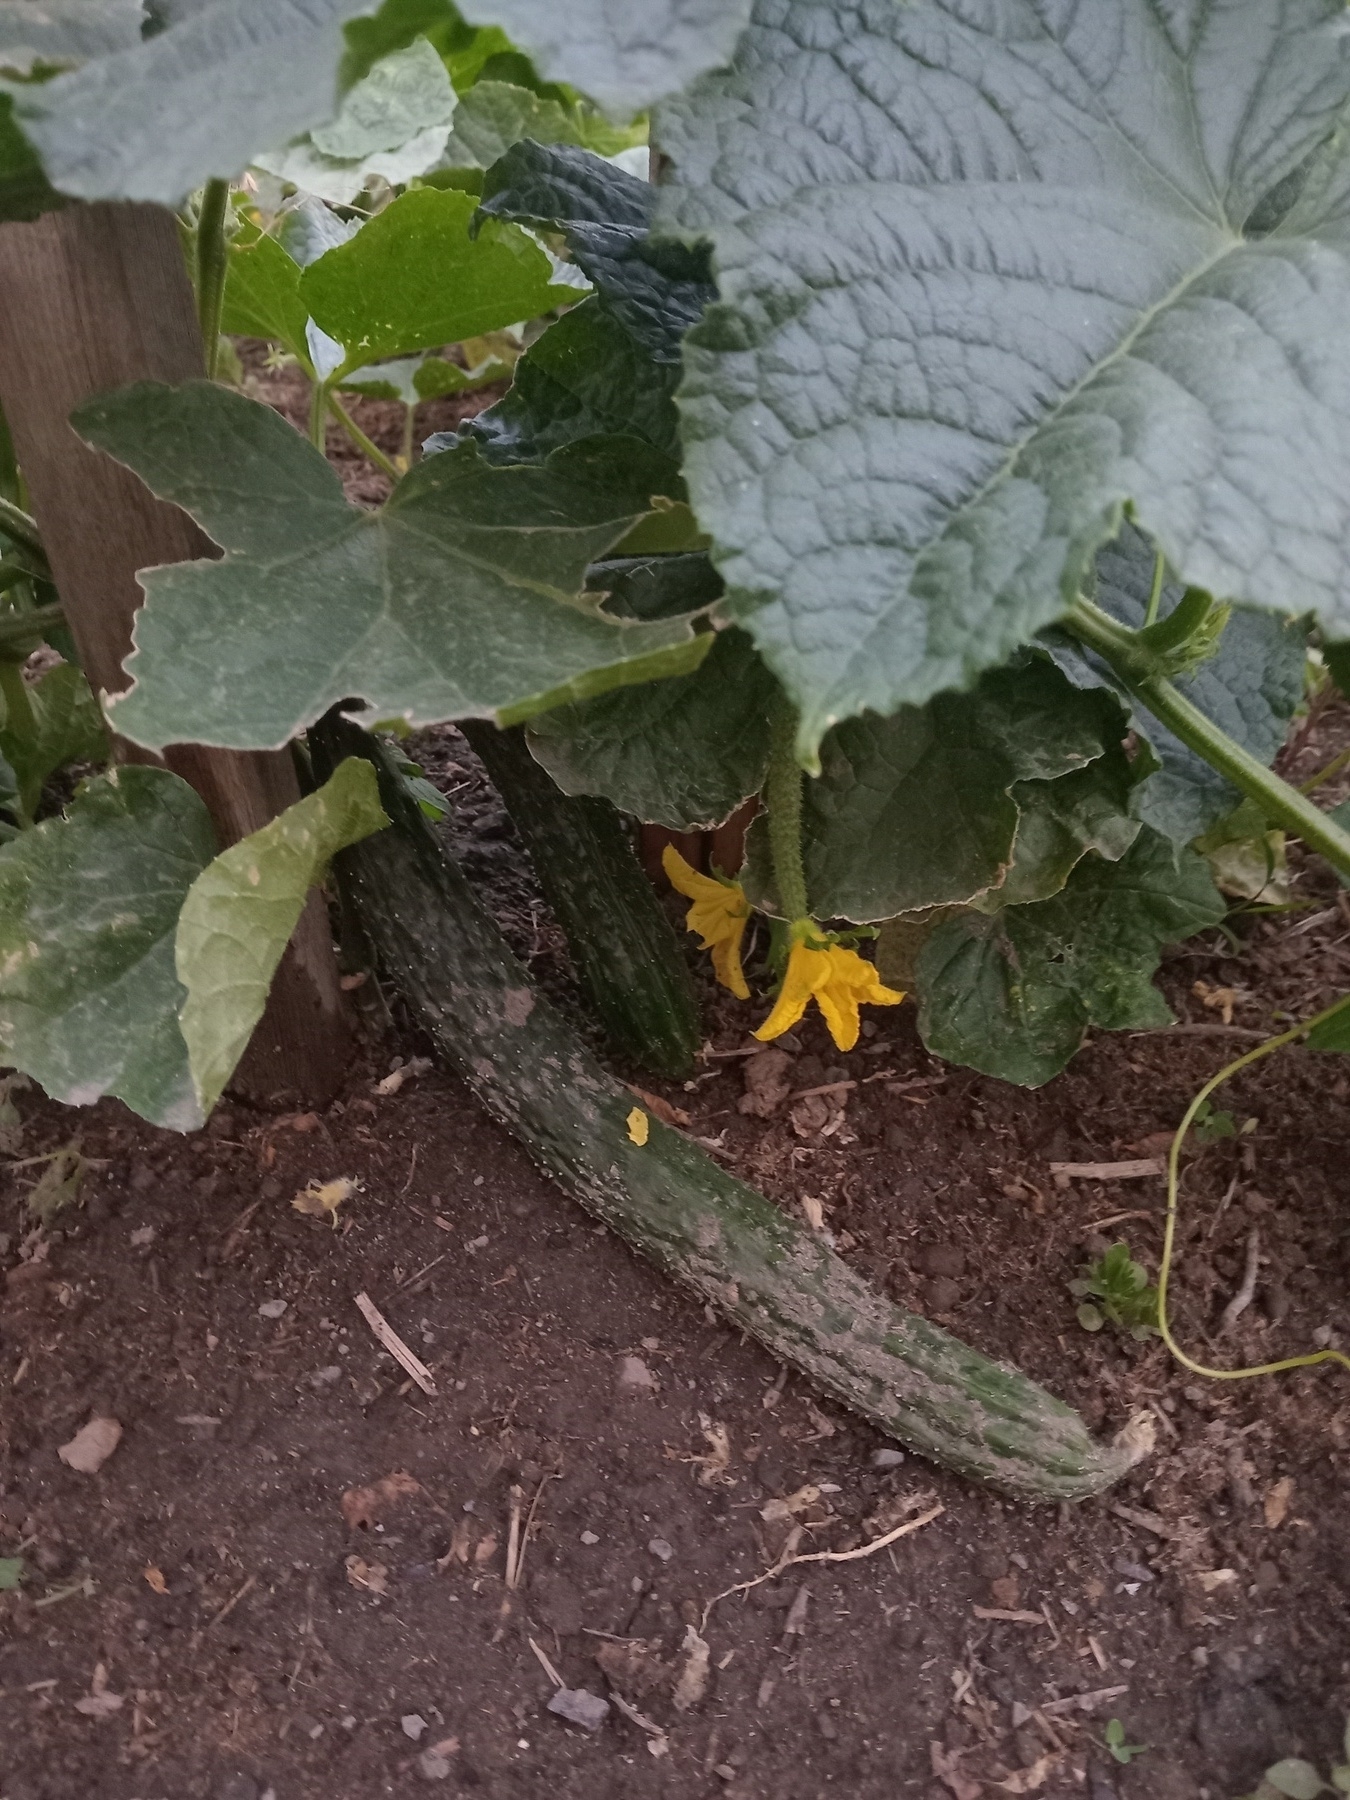 long, bumpy cucumber lying on the dirt under cucumber leaves still attached to the plant with one half of another cucumber visible